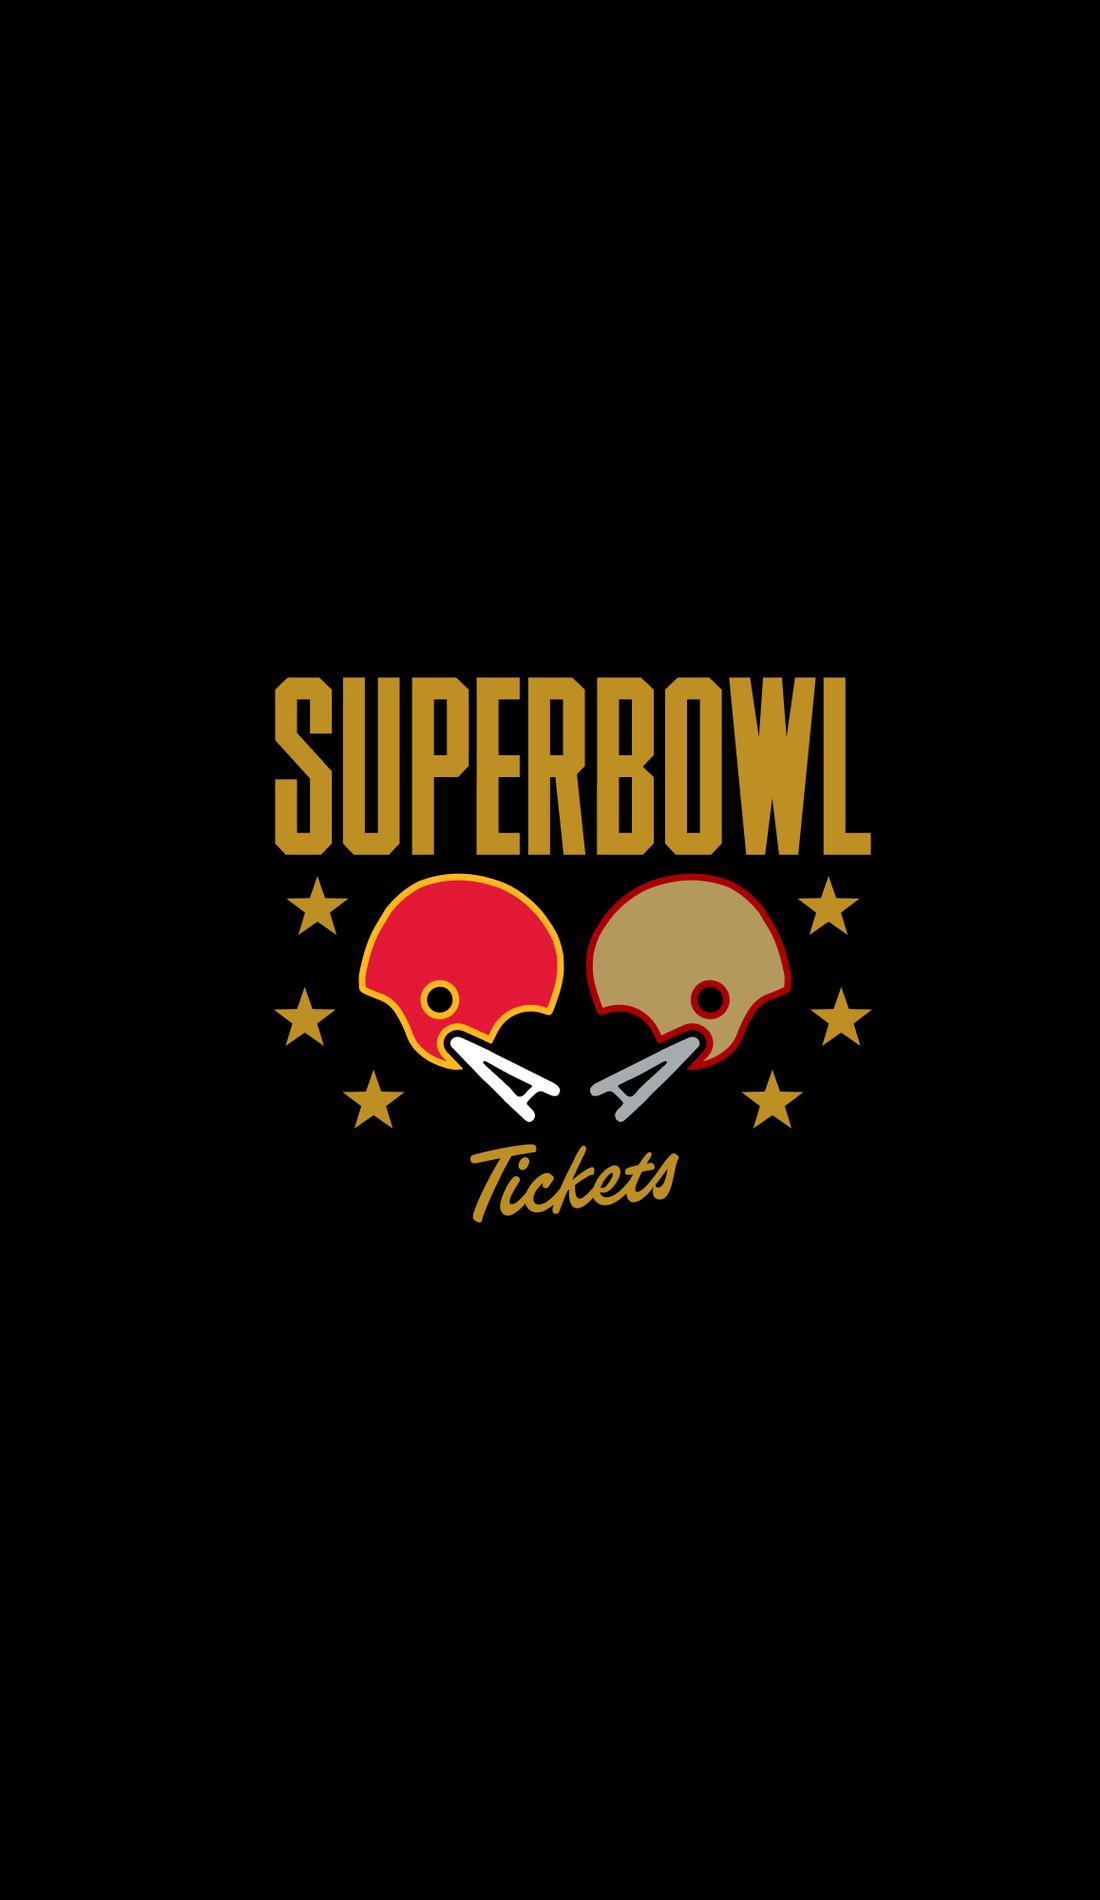 how much are the cheapest super bowl tickets 2022